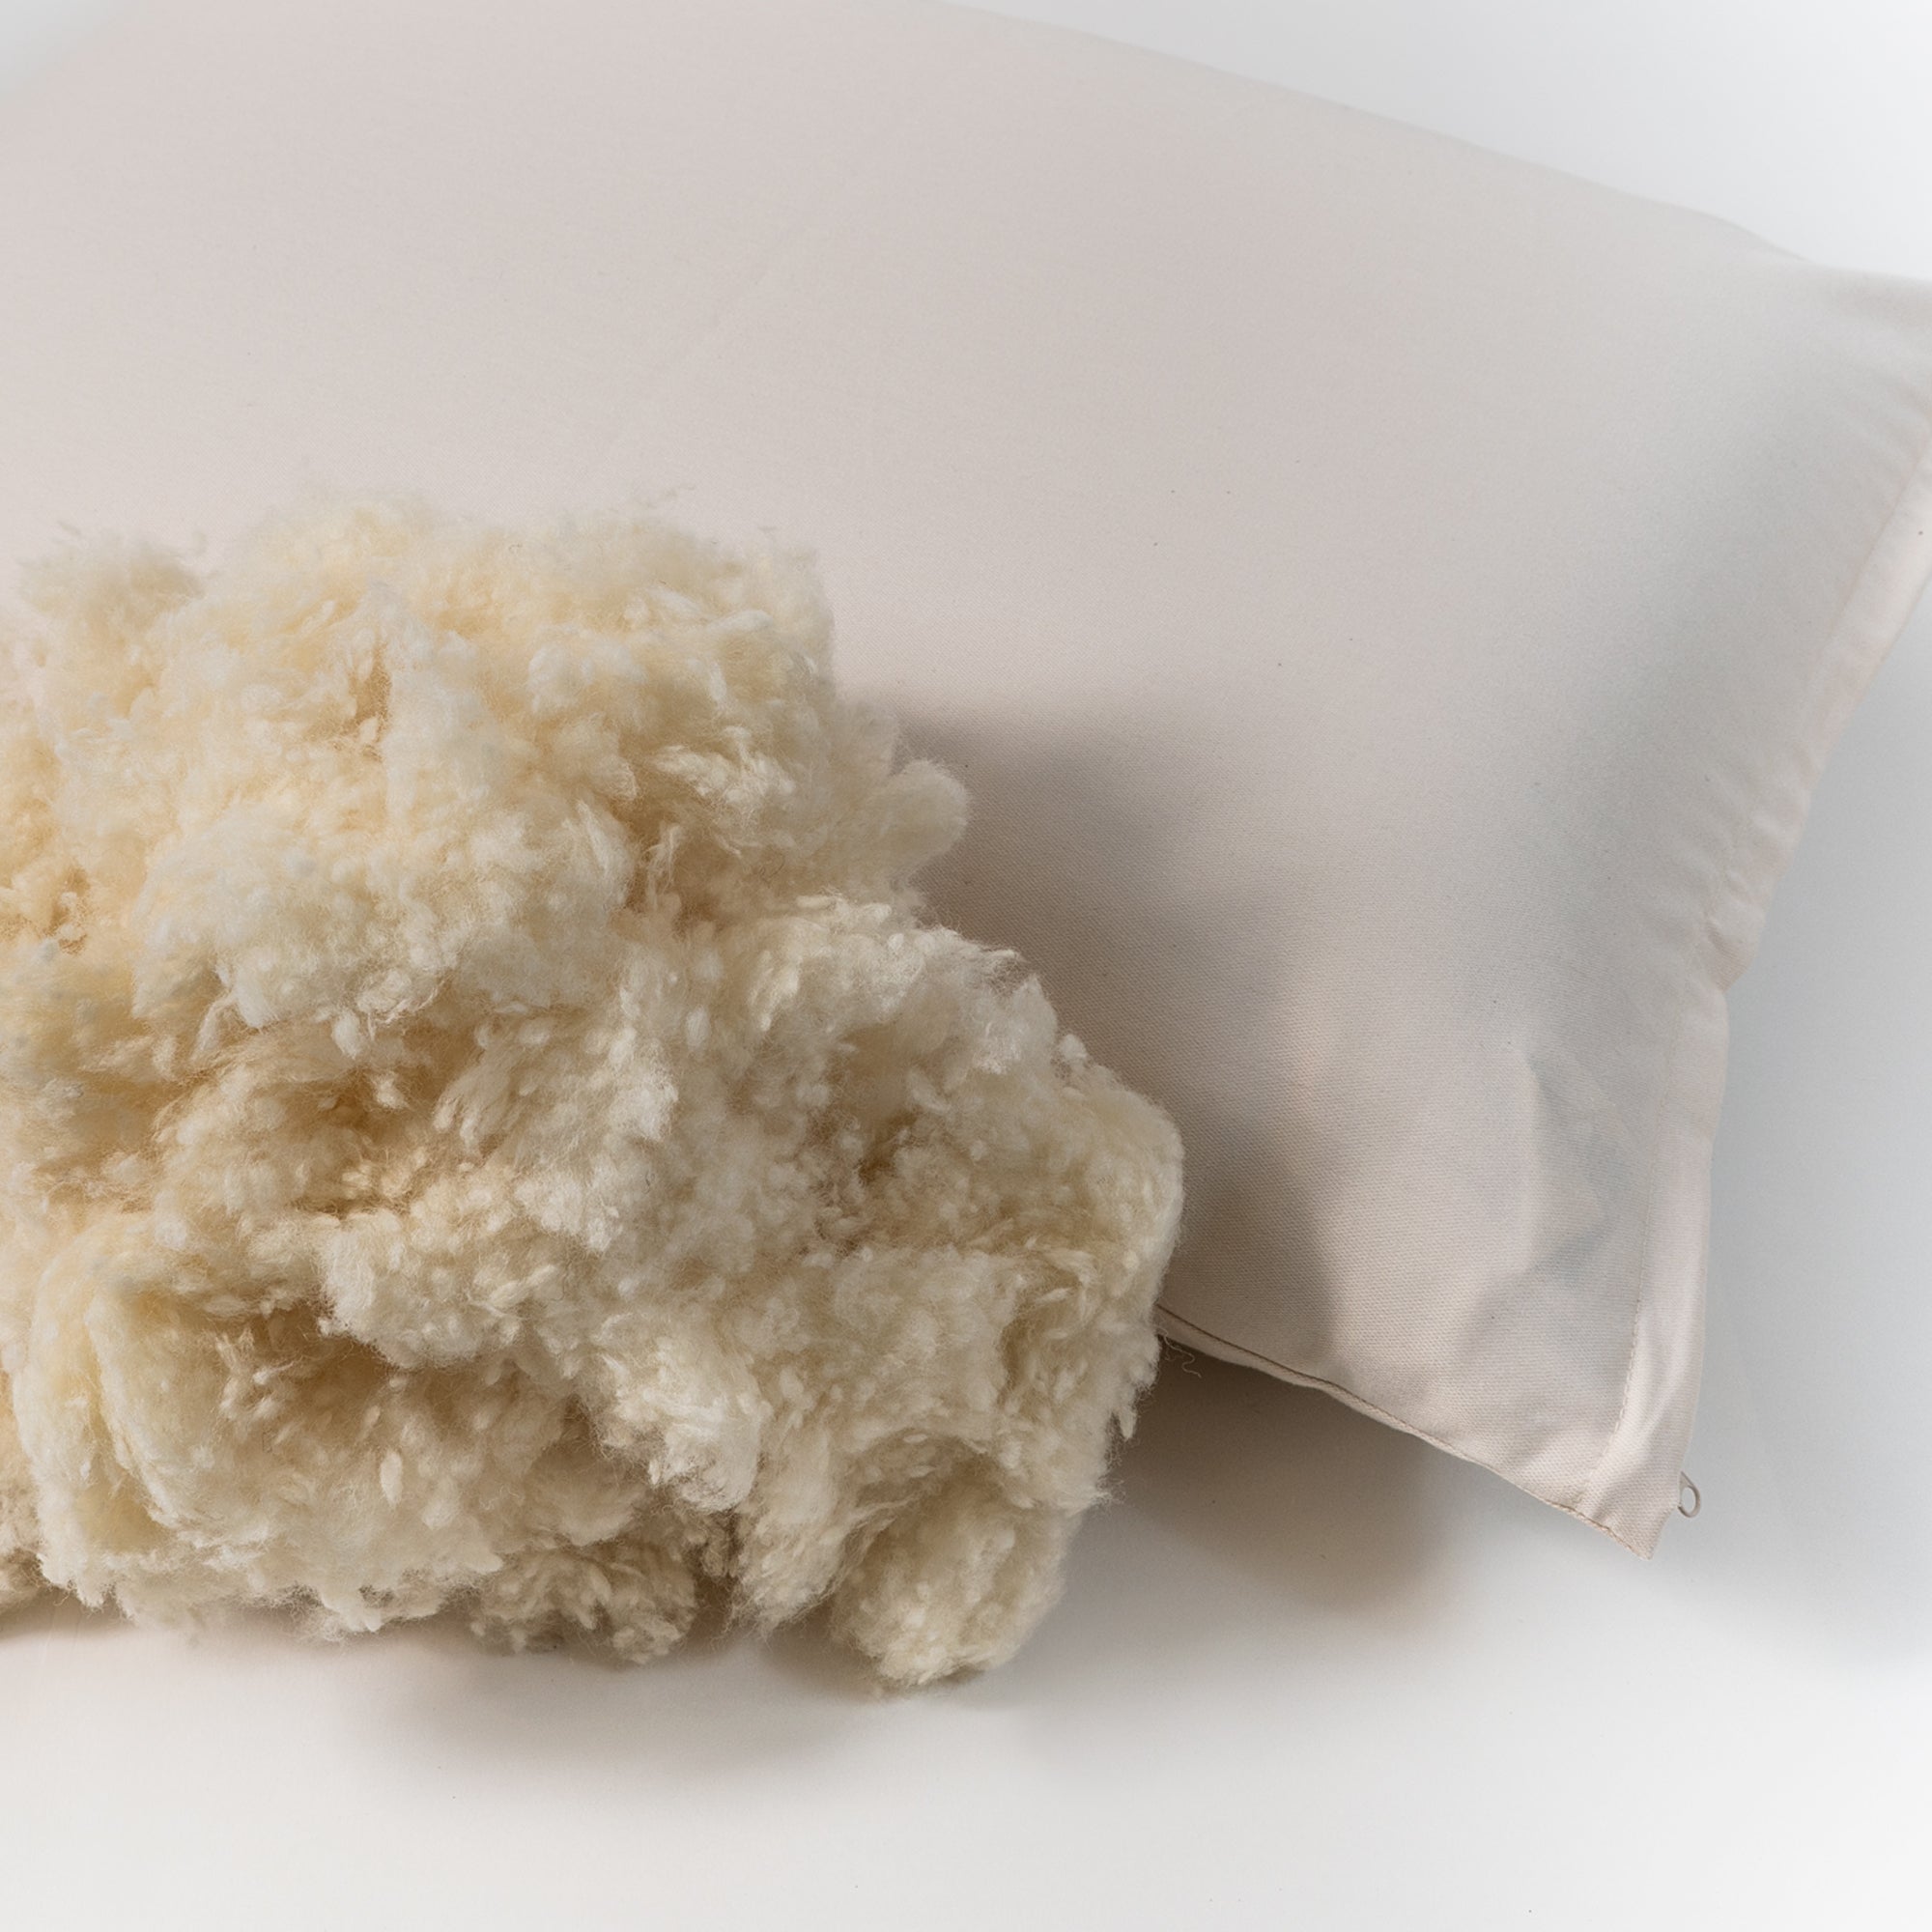 Wooly Bolus: Feel-Good Stuffing for Pillows – The Slipcover Maker